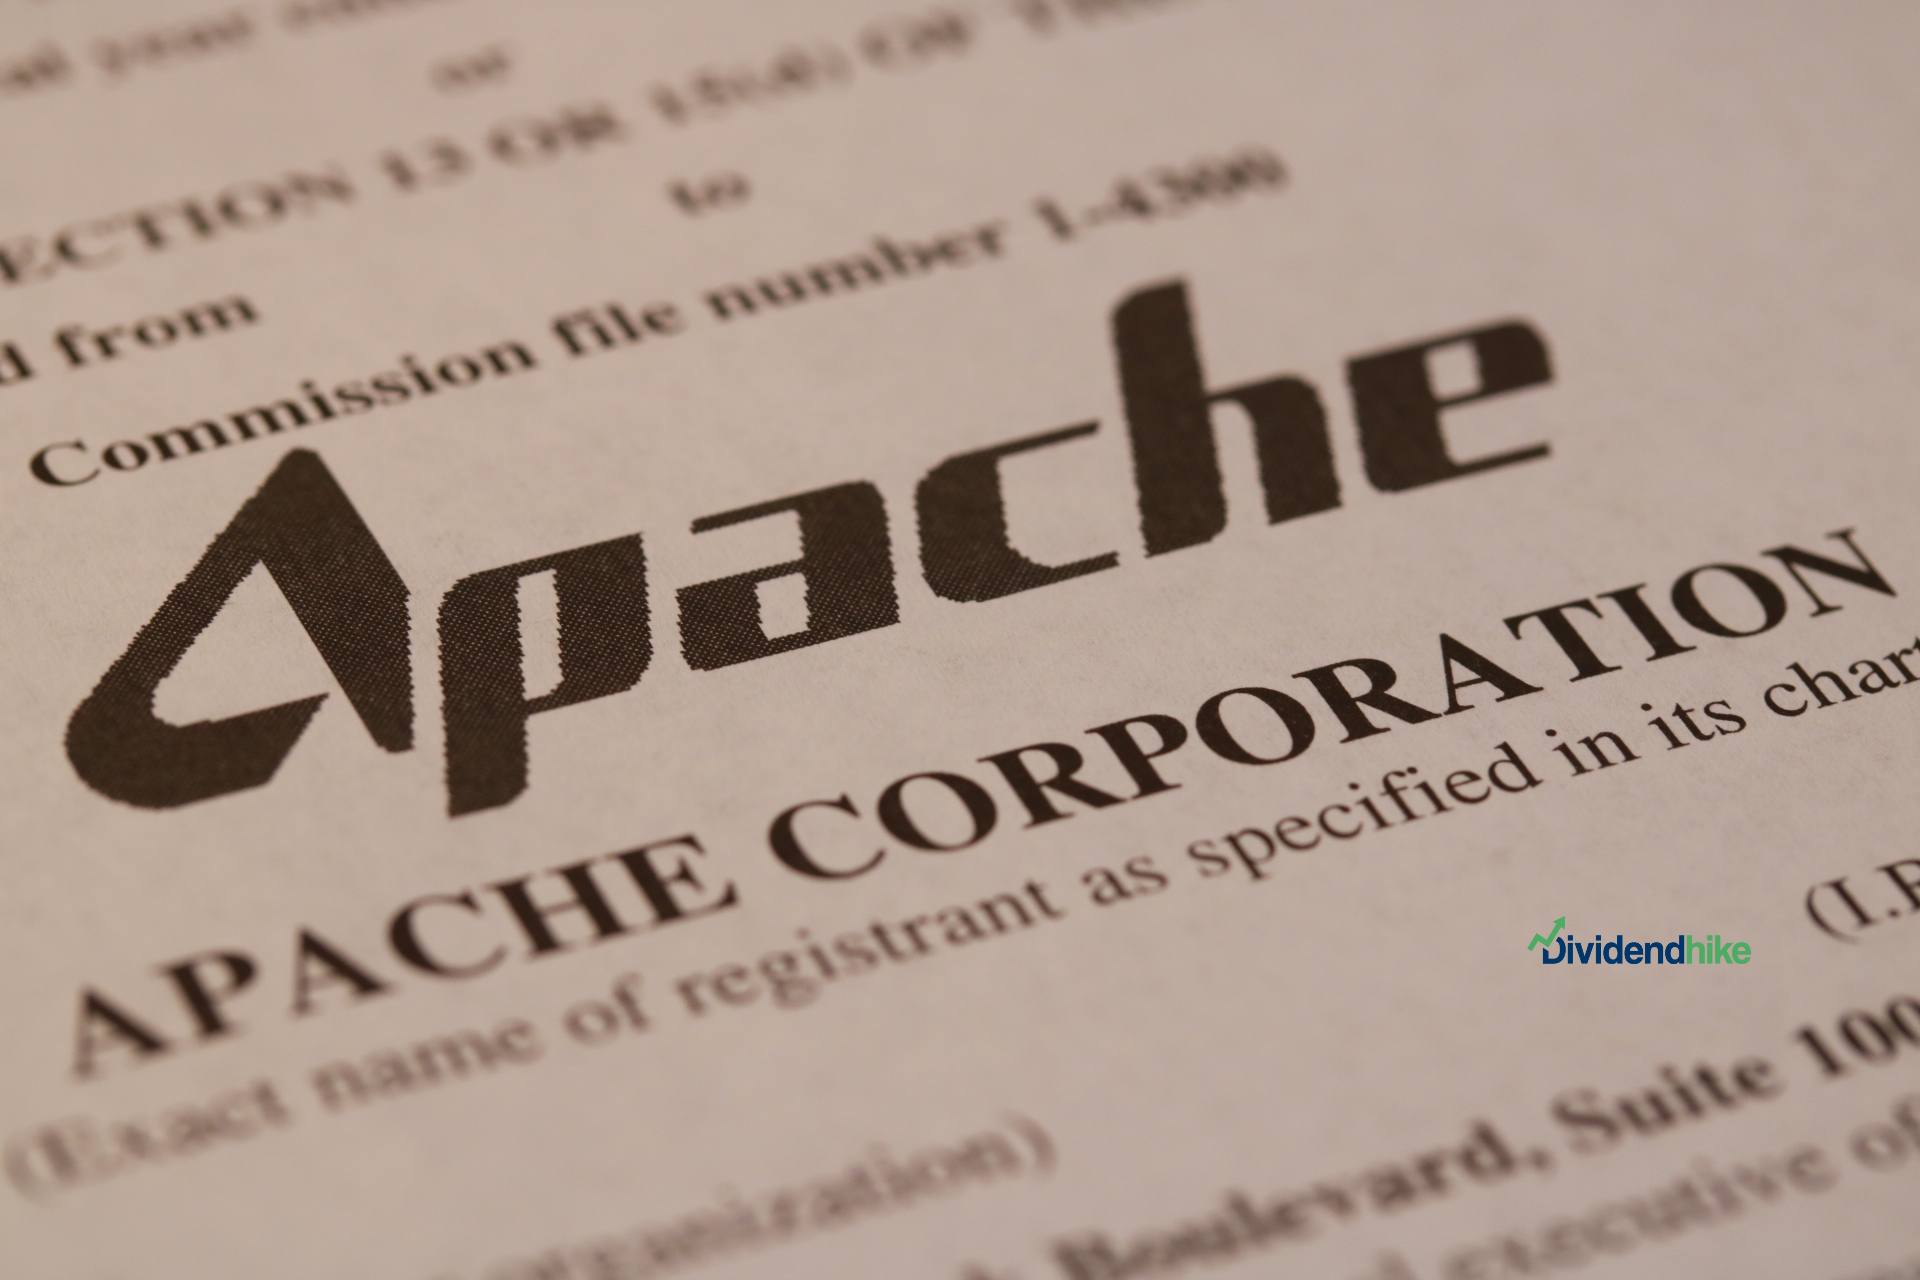 Apache Corporation has paid a dividend every year since 1965 © dividendhike.com